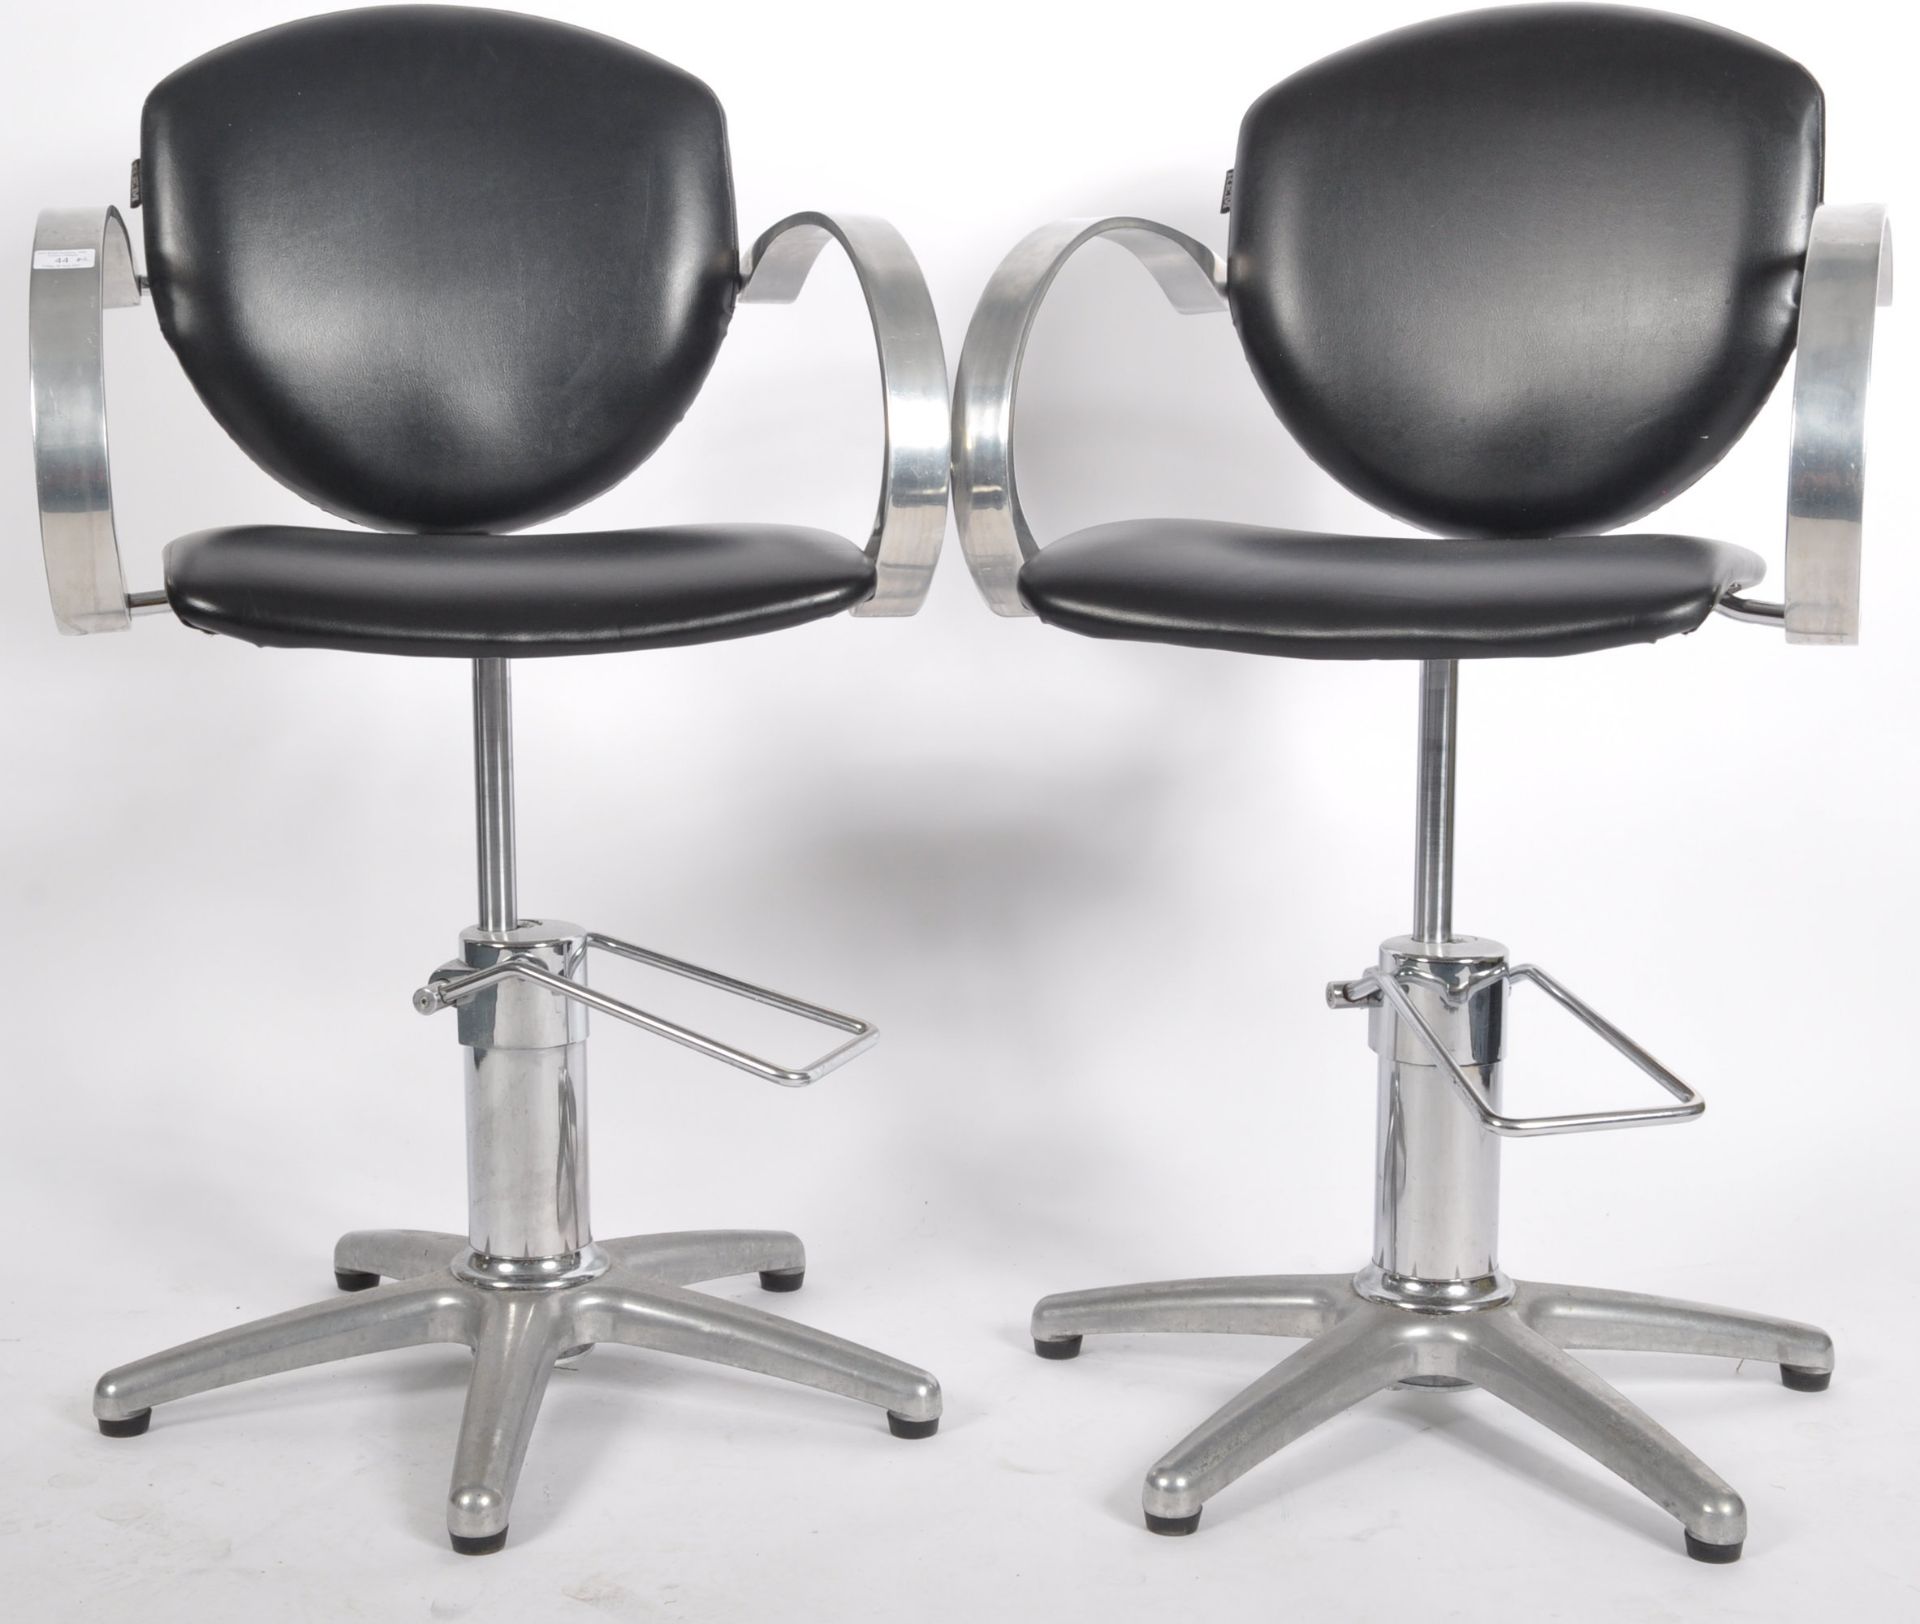 REM - MATCHING PAIR OF ADJUSTABLE BARBER'S ARMCHAIRS